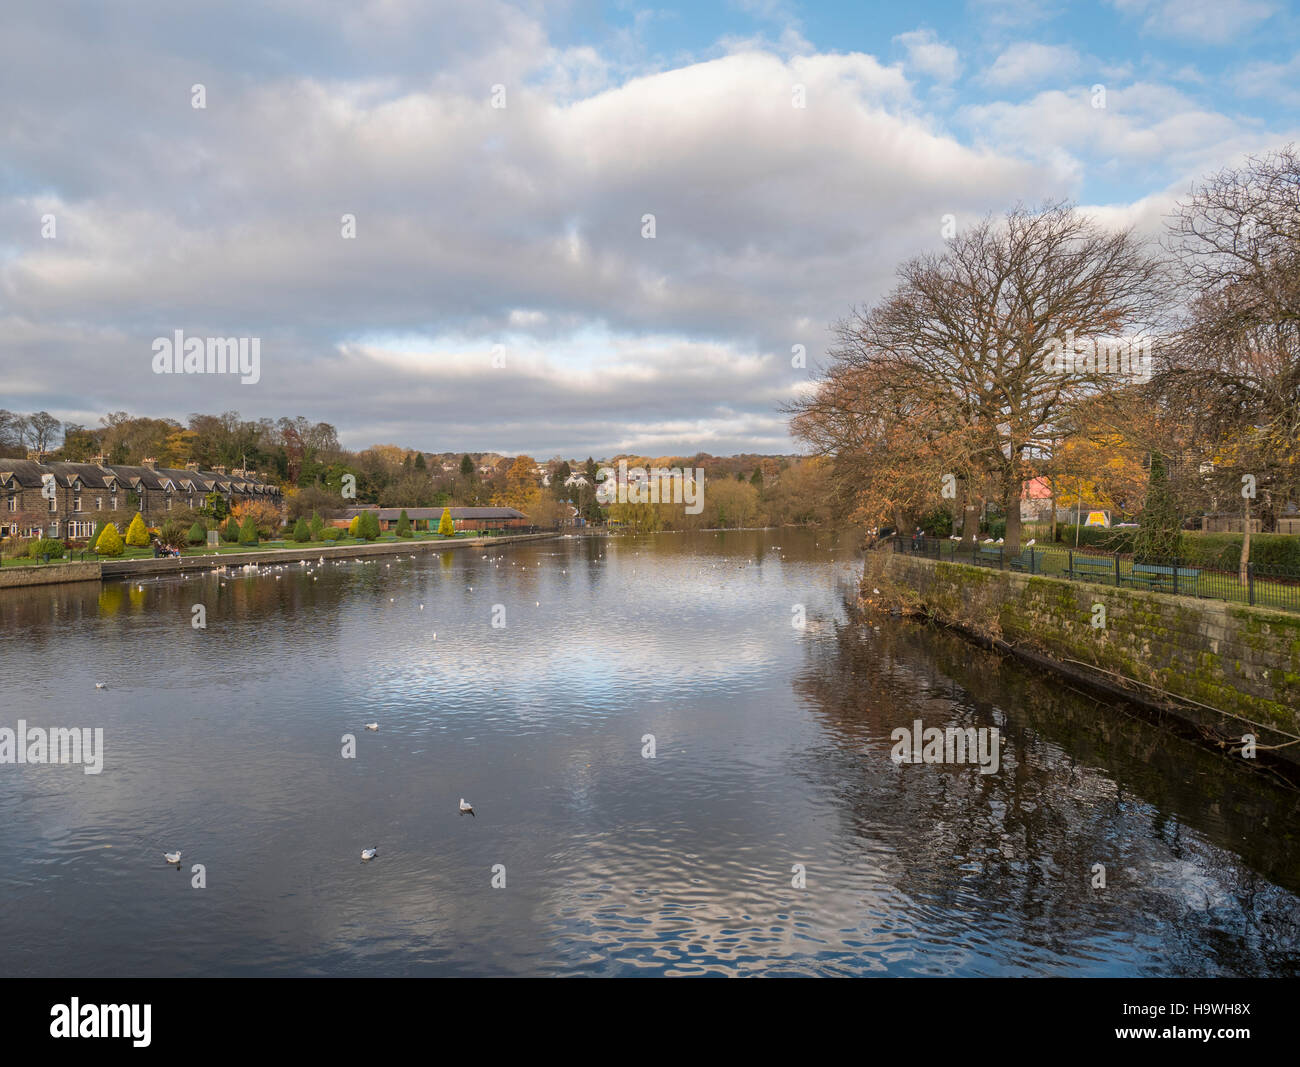 Lovely Autumn day on the River Wharfe, Otley, with Wharfemeadows Park in the background Stock Photo